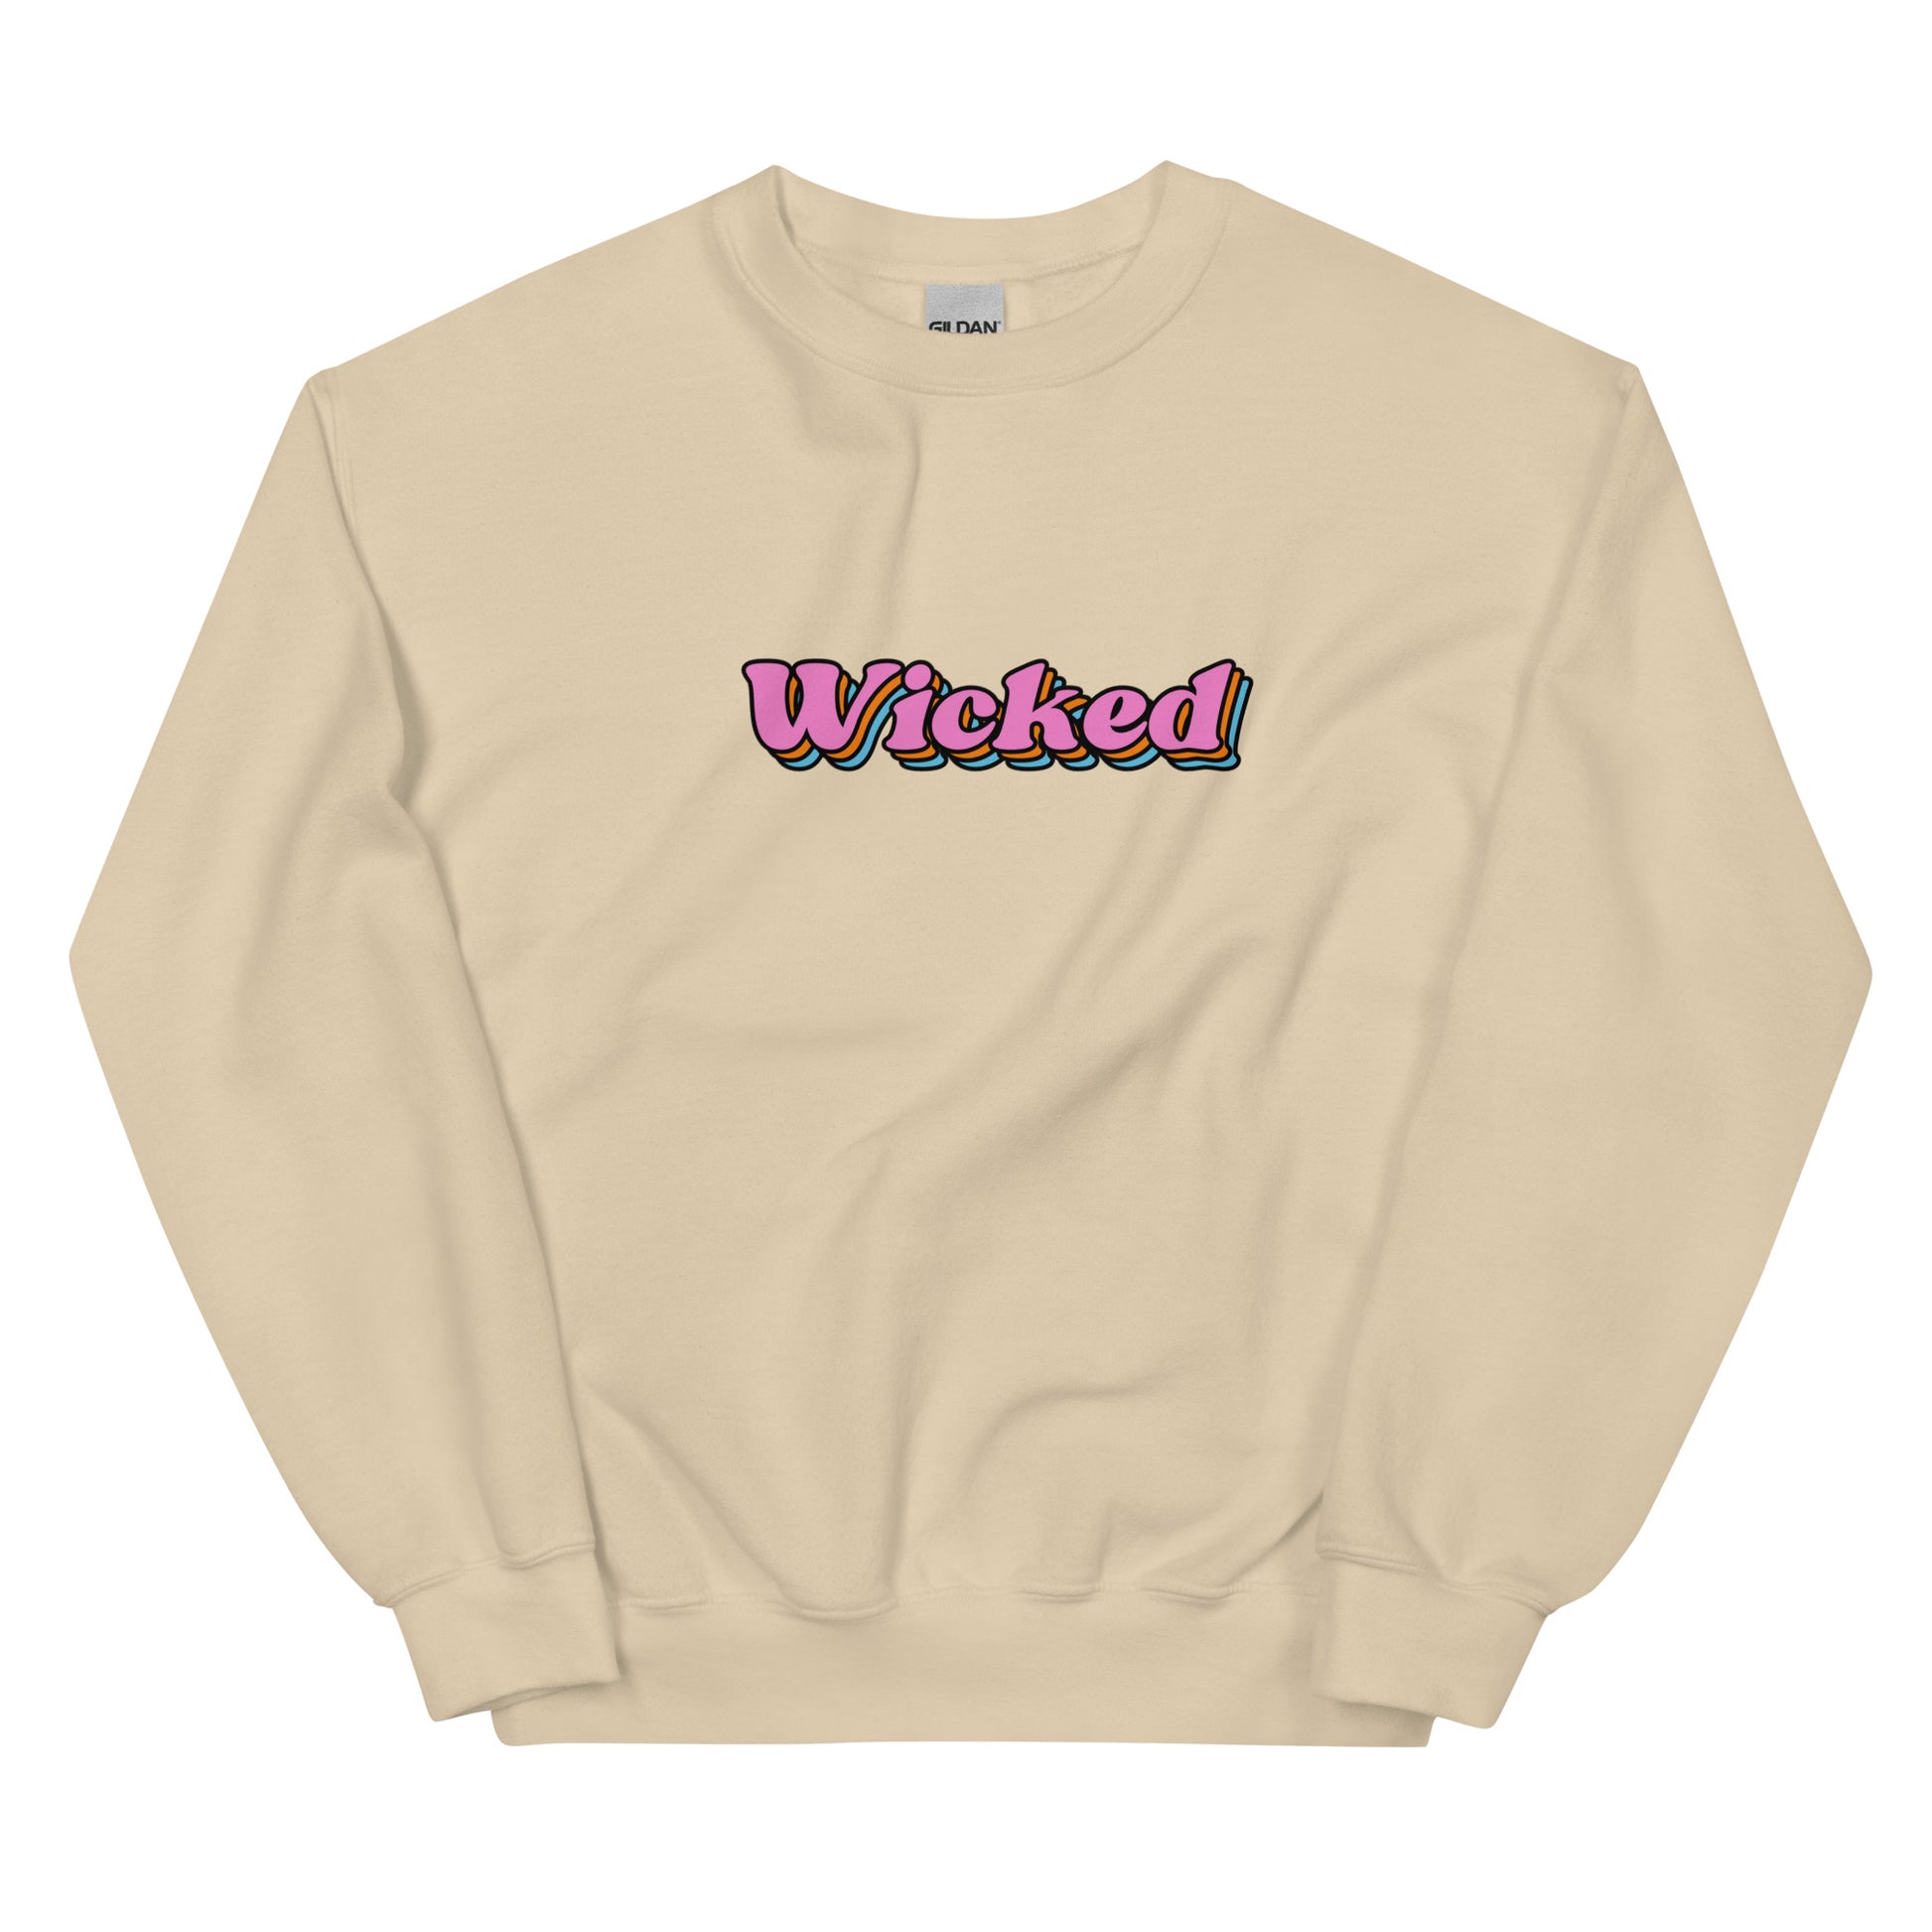 tan crewneck that says "wicked" in pink lettering